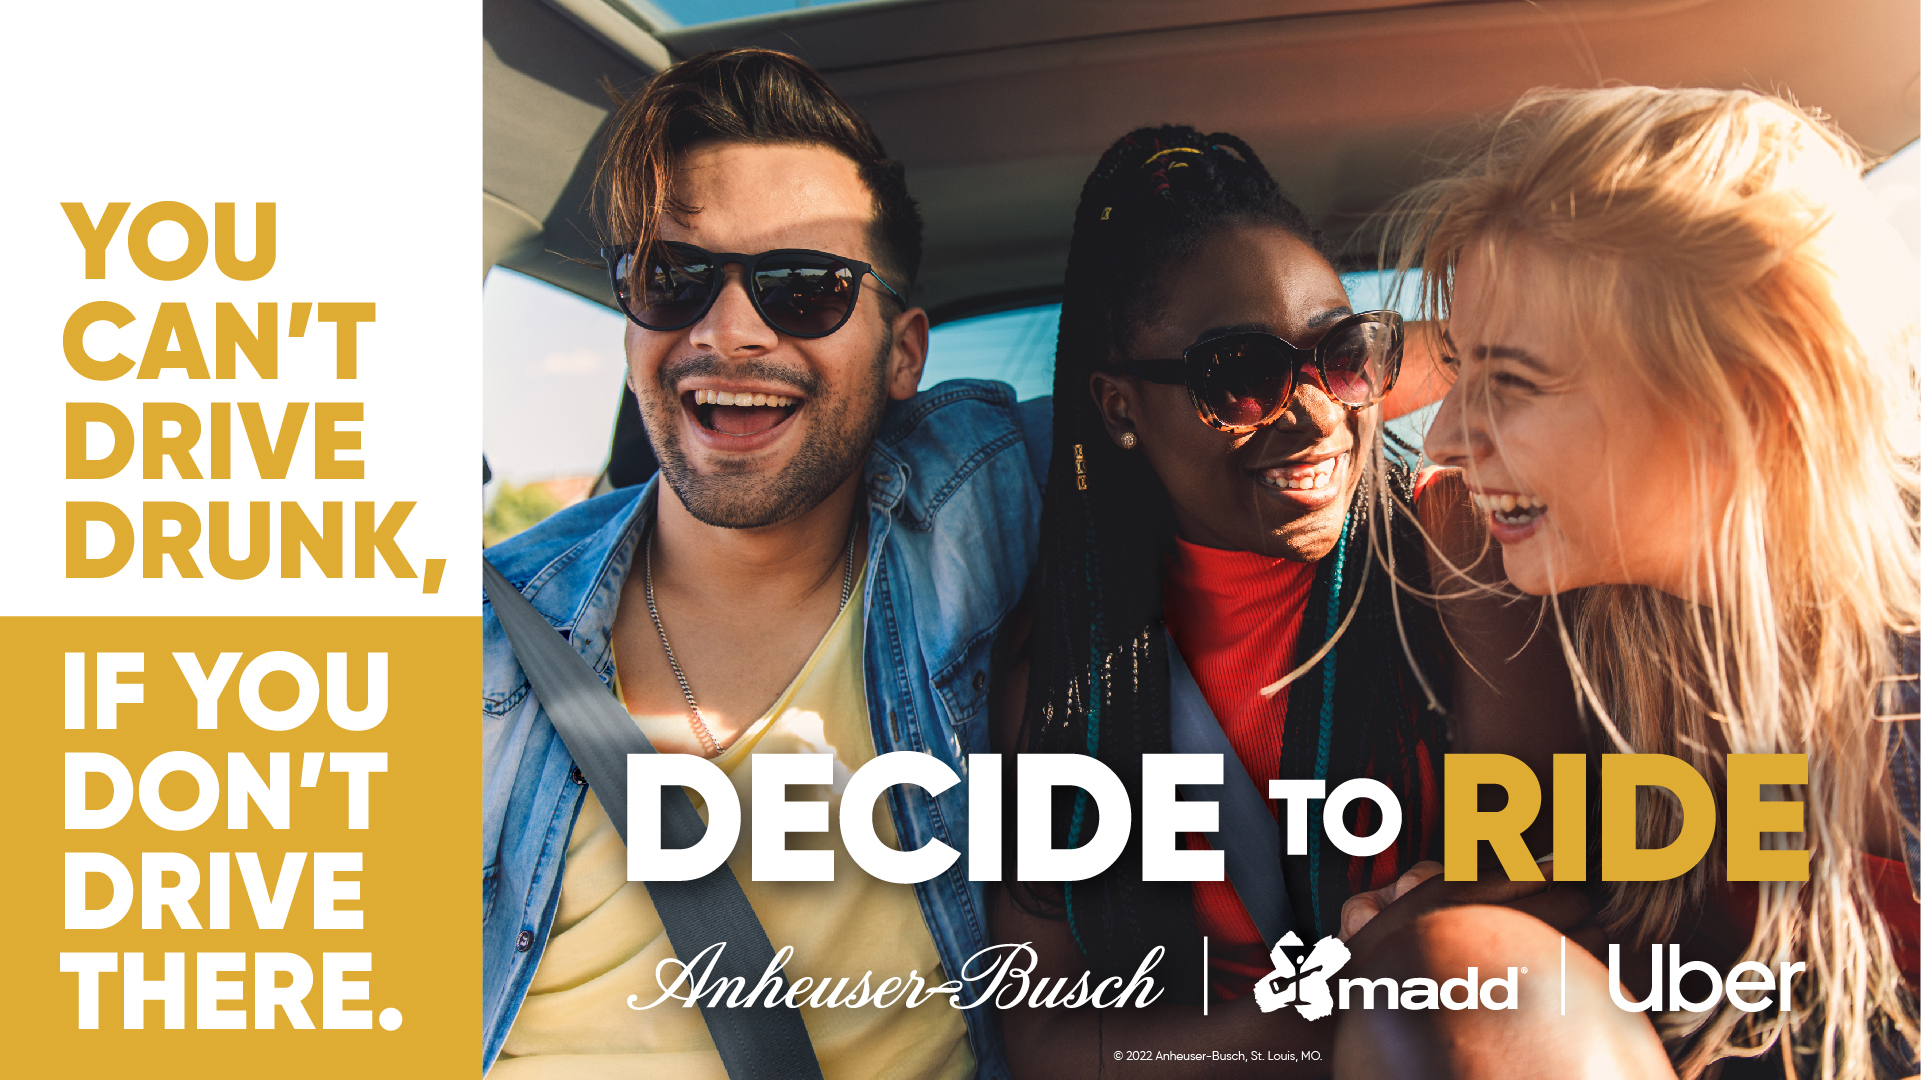 Anheuser-Busch, MADD and Uber Expand ‘Decide to Ride’ Campaign to Help Prevent Drunk Driving This Summer